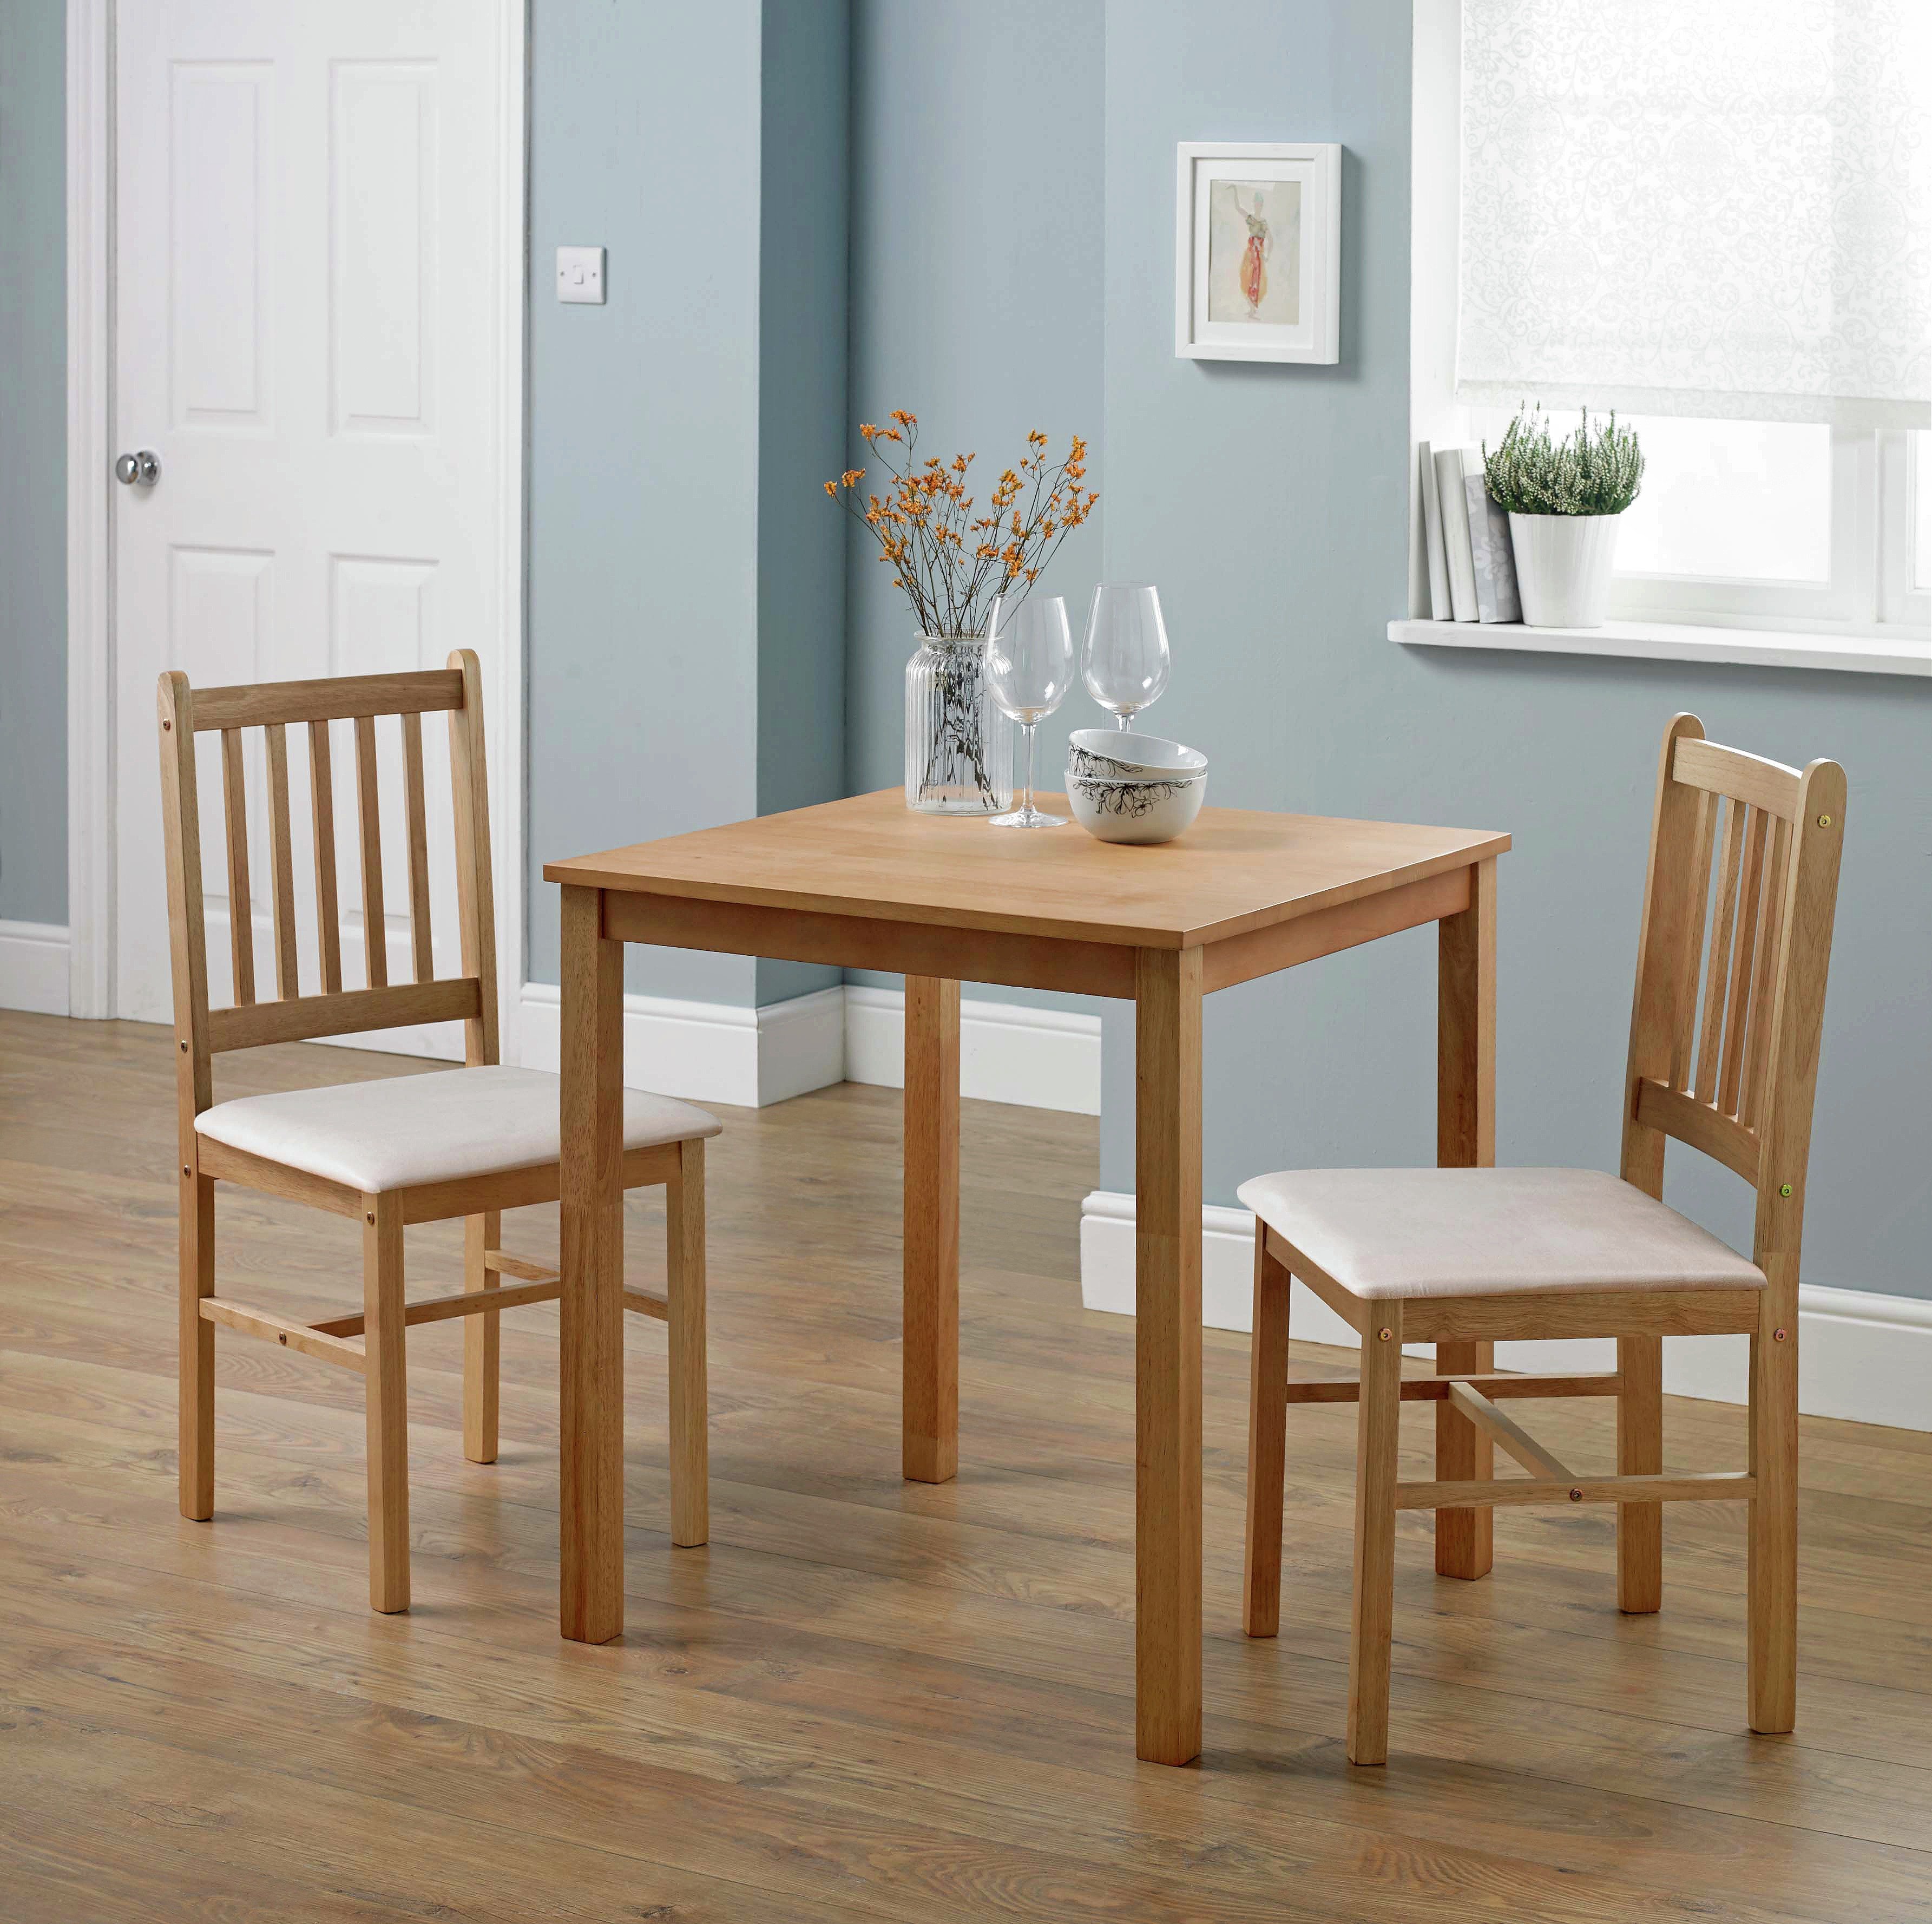 Argos Home Kendal Square Solid Wood Table & 2 Chairs - Cream